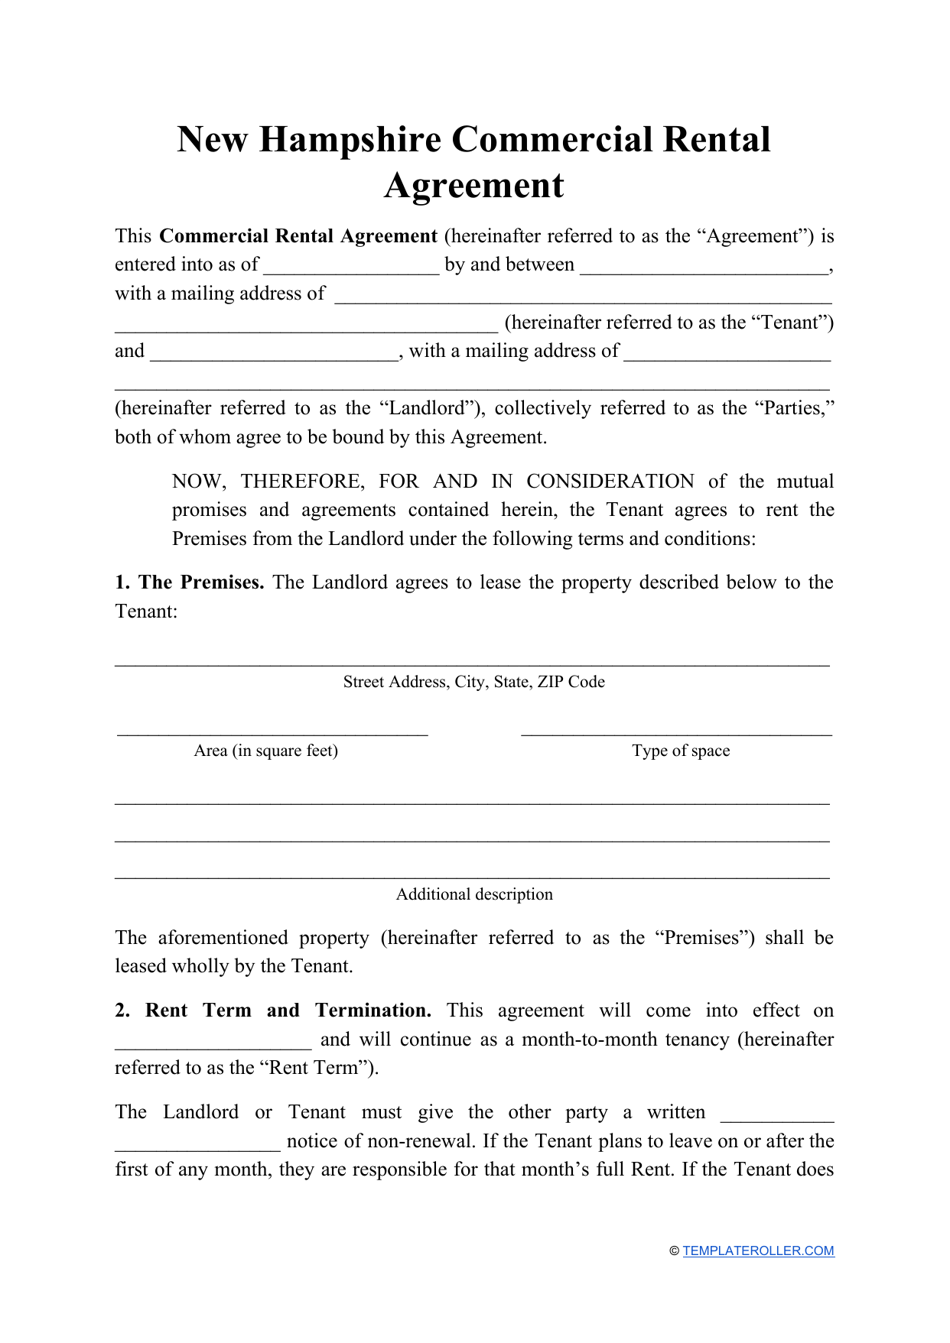 Commercial Rental Agreement Template - New Hampshire, Page 1